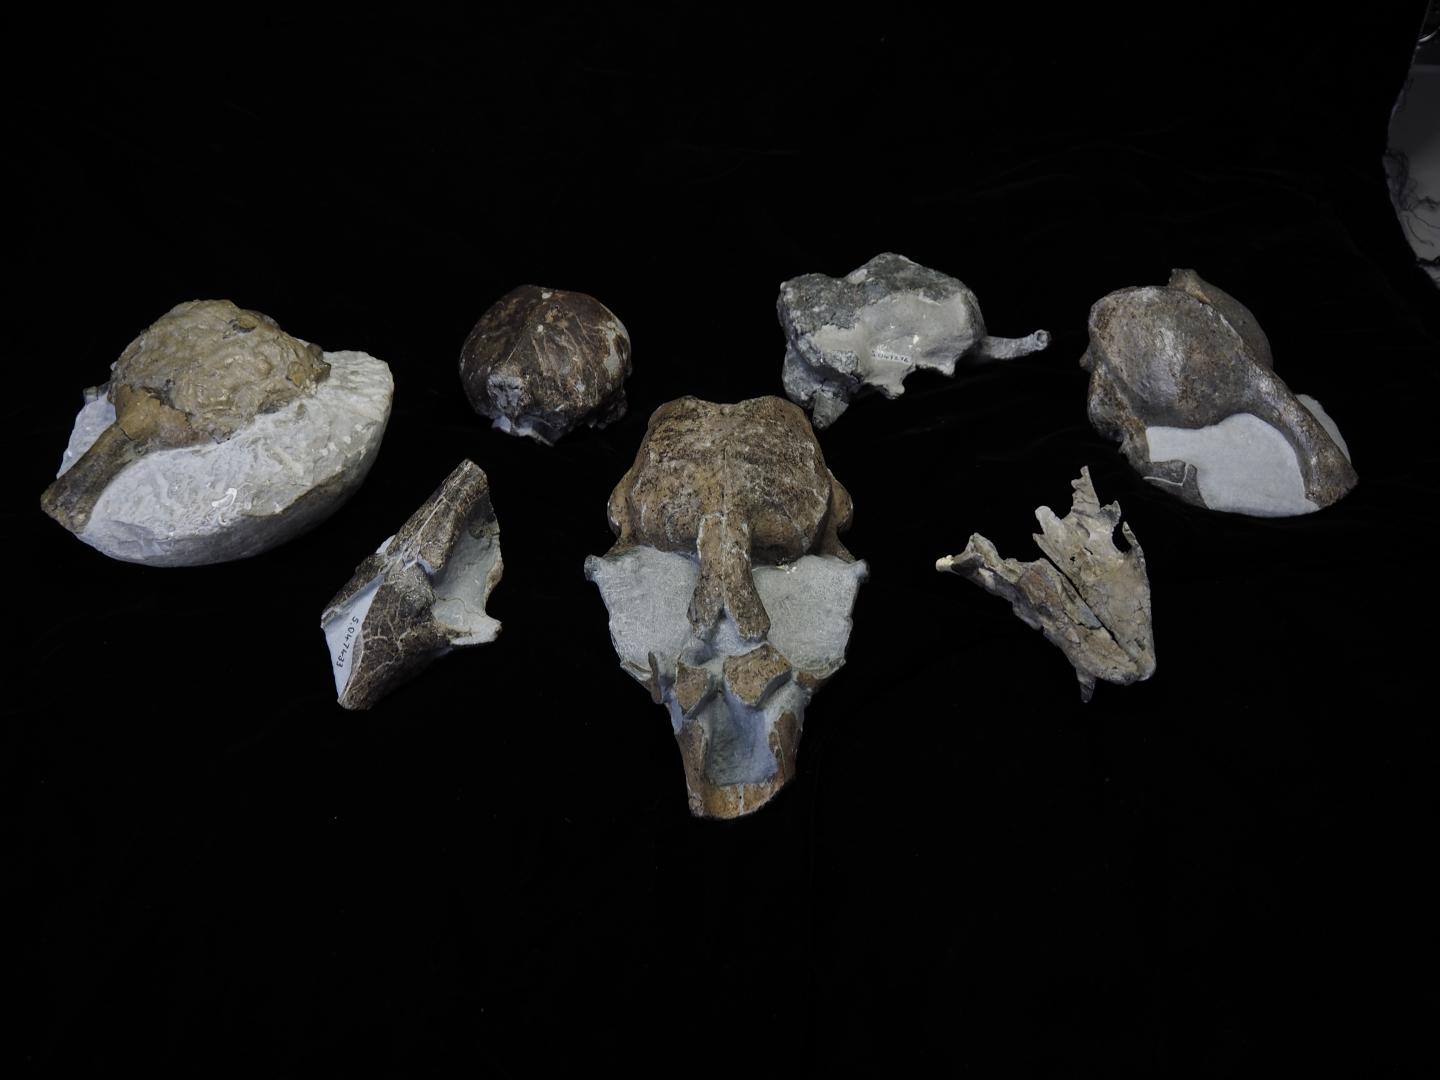 Pieces of the fossil specimens discovered include a complete skull